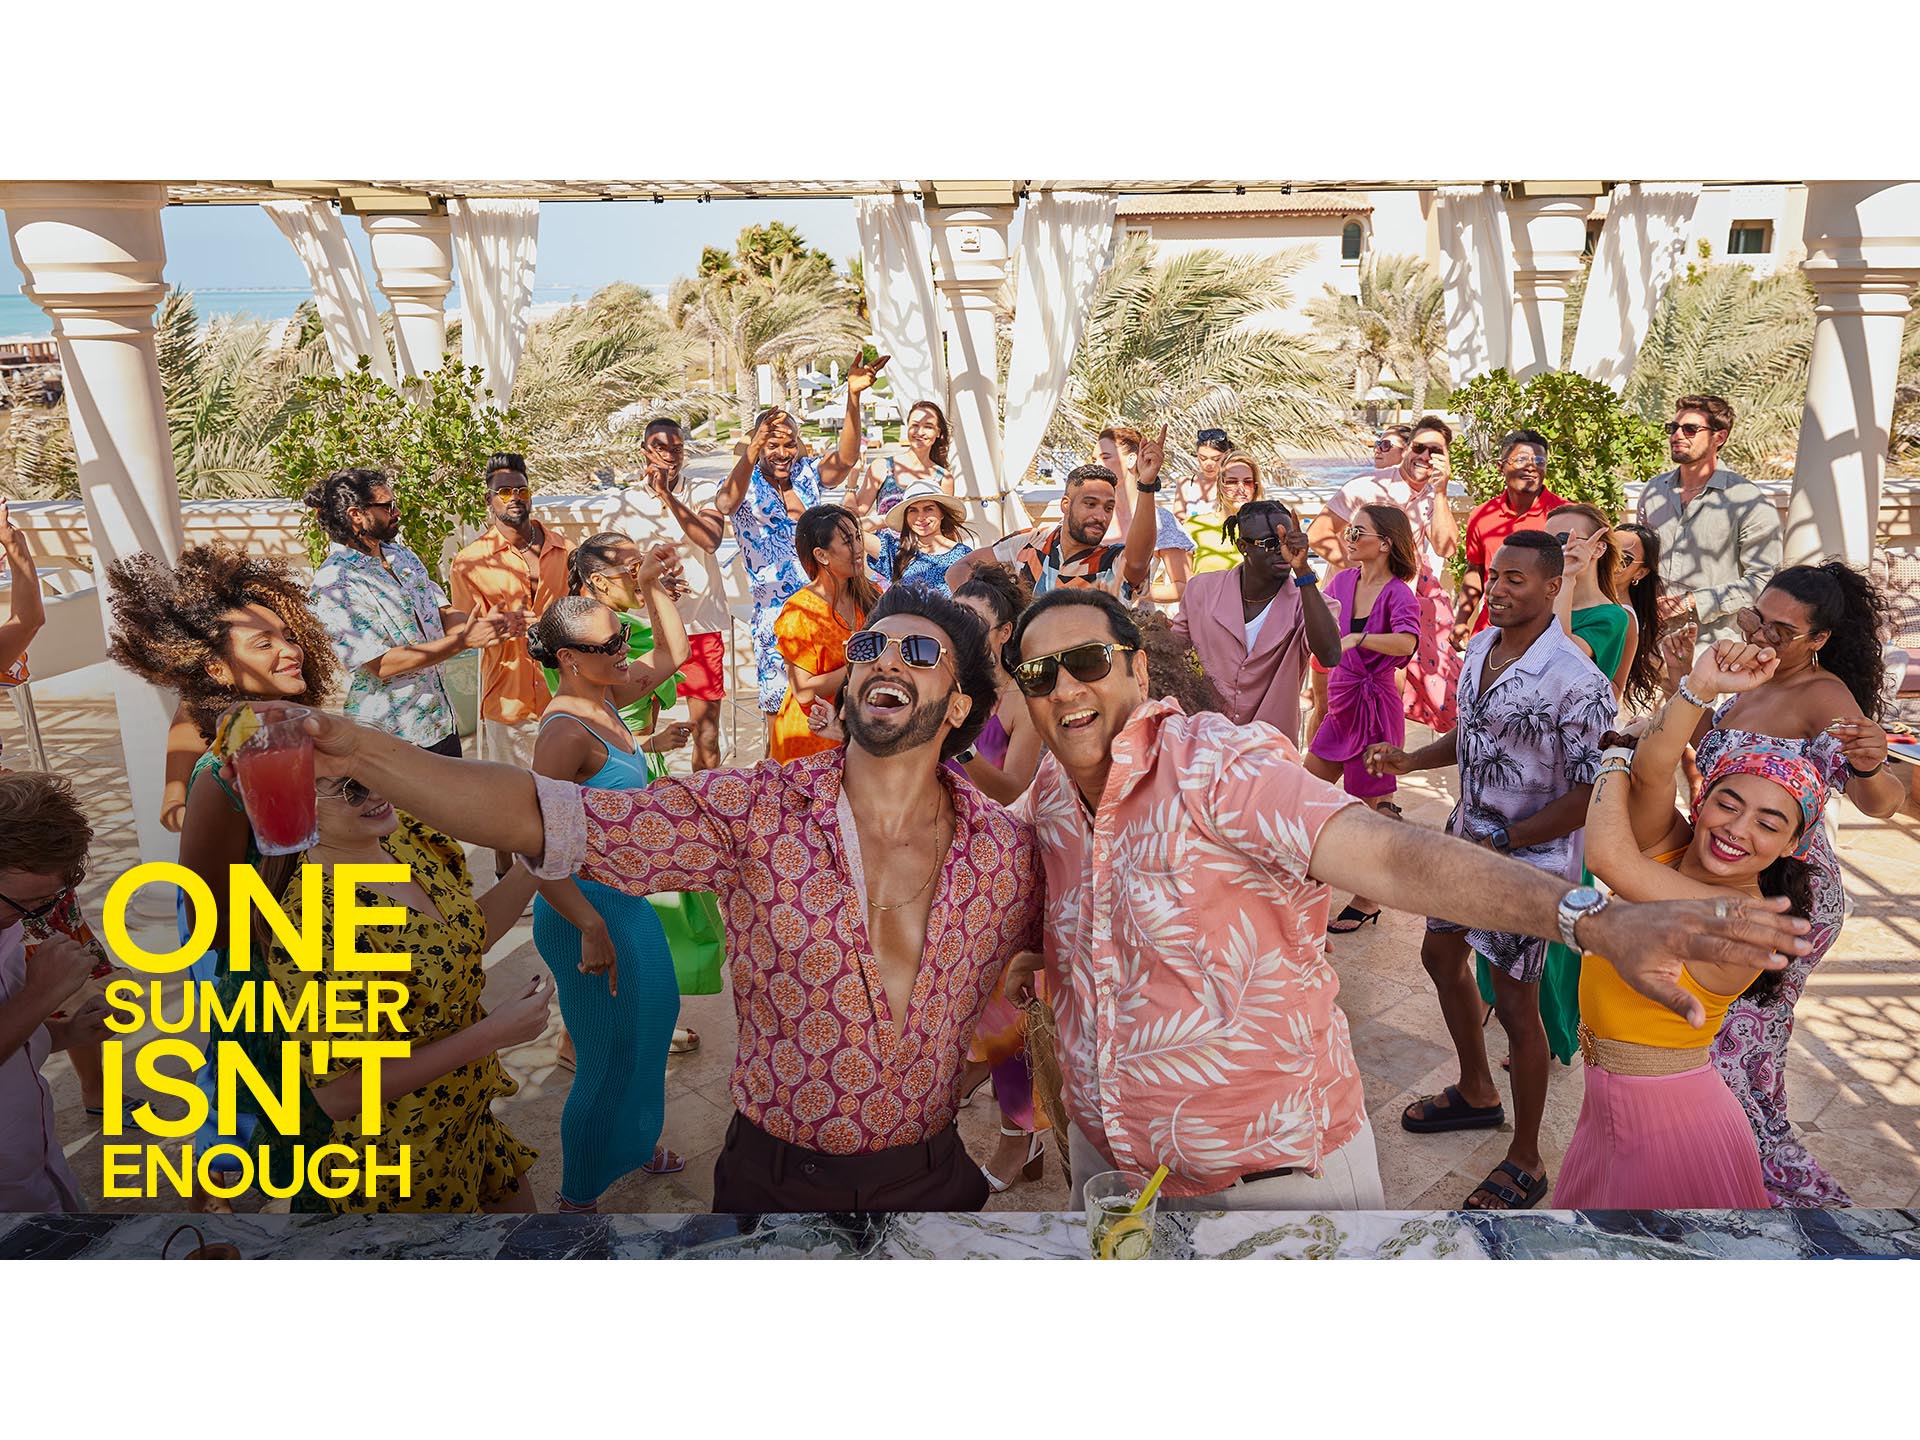 ‘One Summer Isn’t Enough’, first campaign by Serviceplan ME for DCT Abu Dhabi positions the emirate as a summer destination